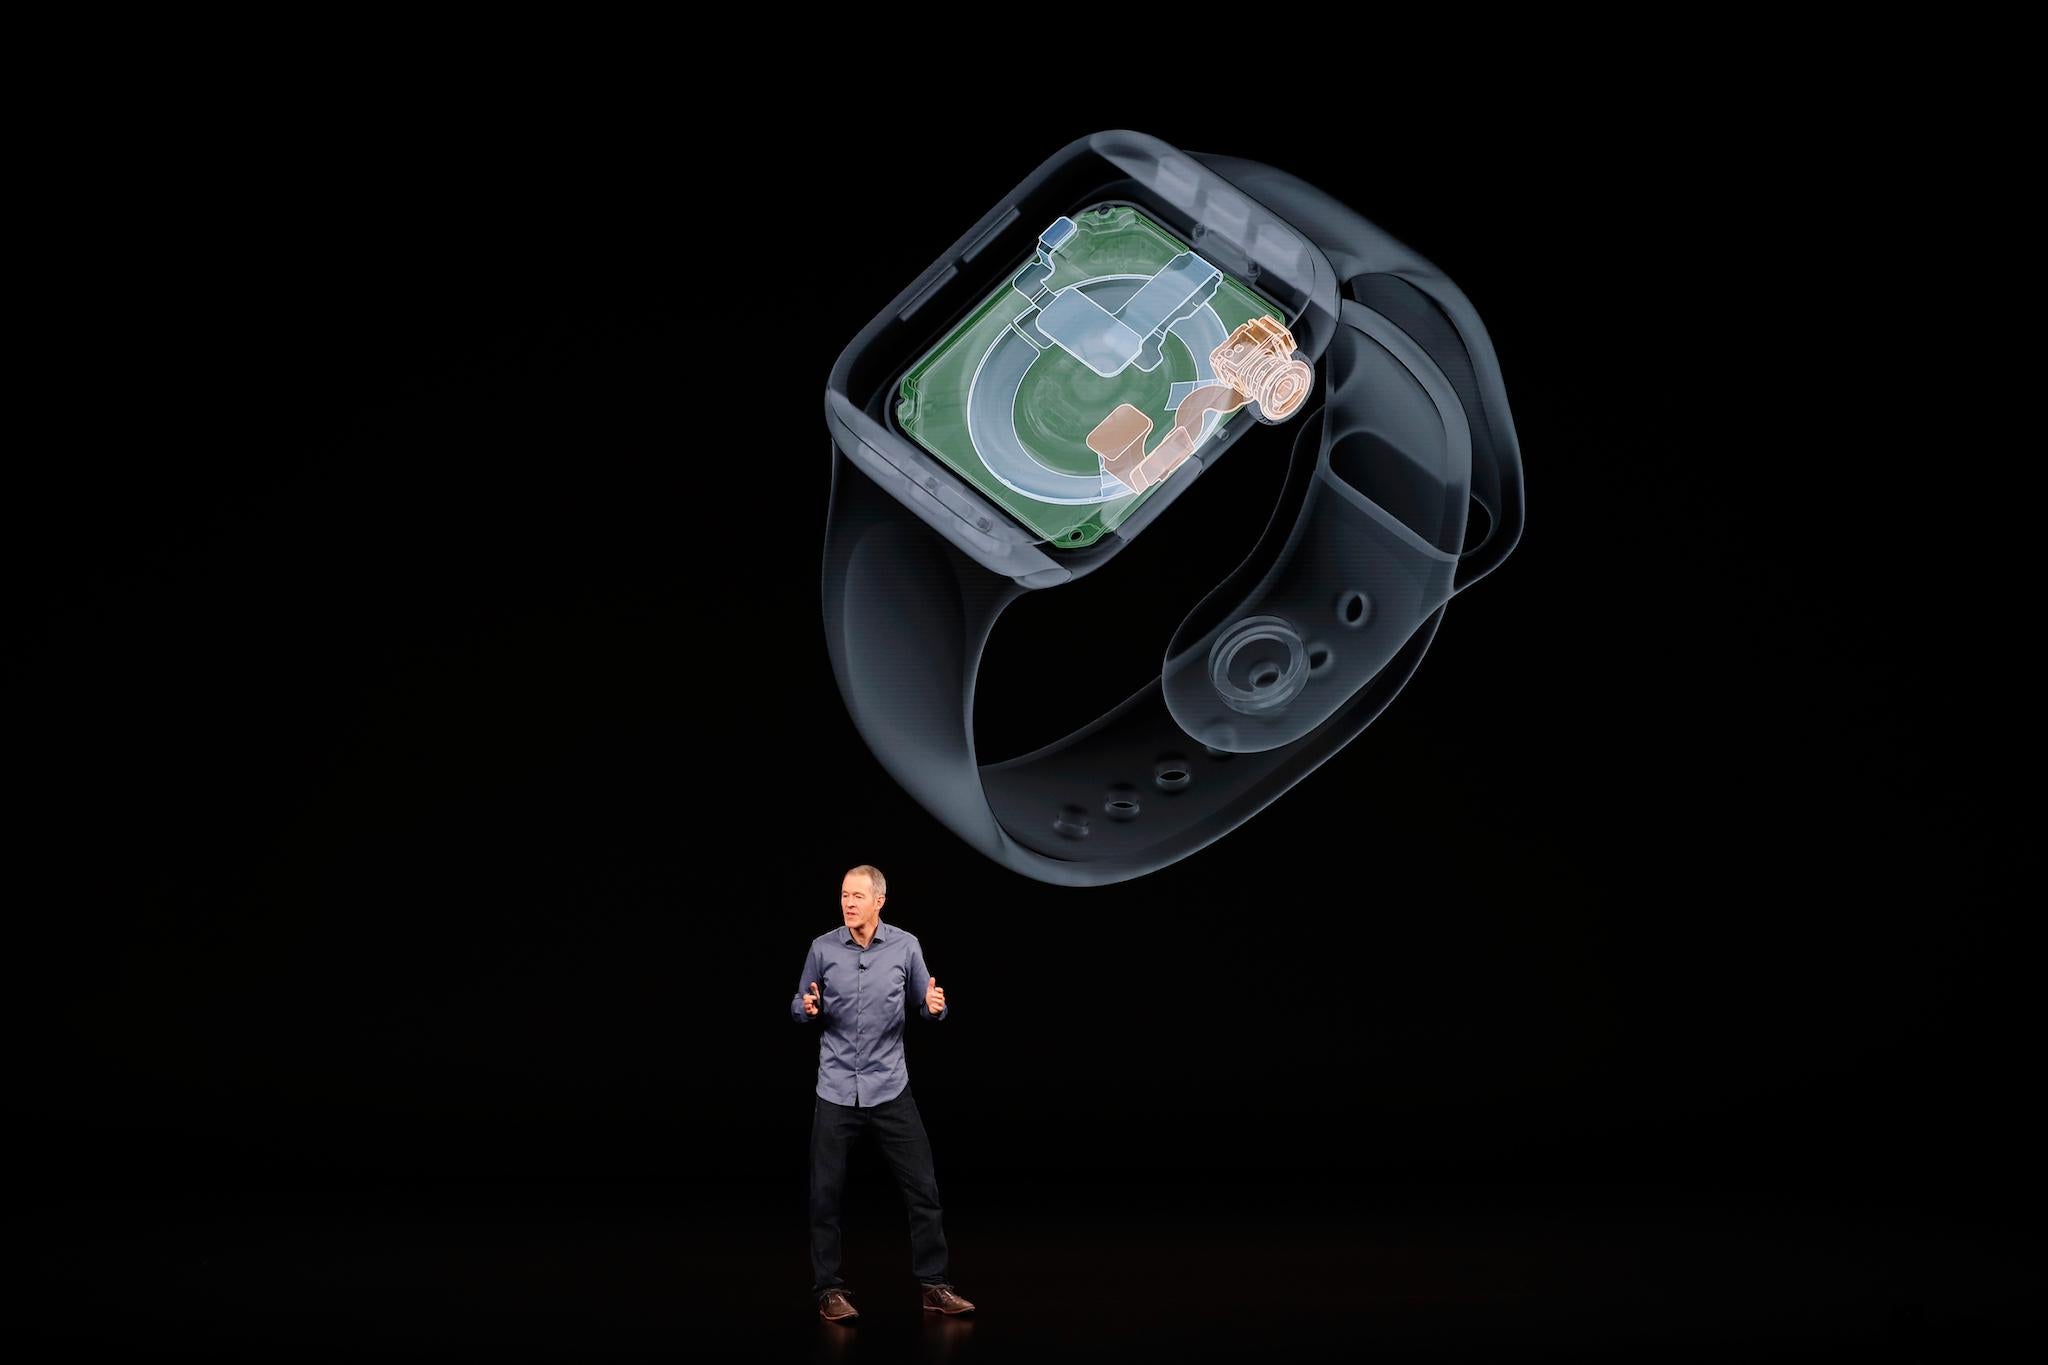 Jeff Williams, Chief Operating Officer of Apple, speaks about the the new Apple Watch Series 4 at an Apple Inc product launch event at the Steve Jobs Theater in Cupertino, California